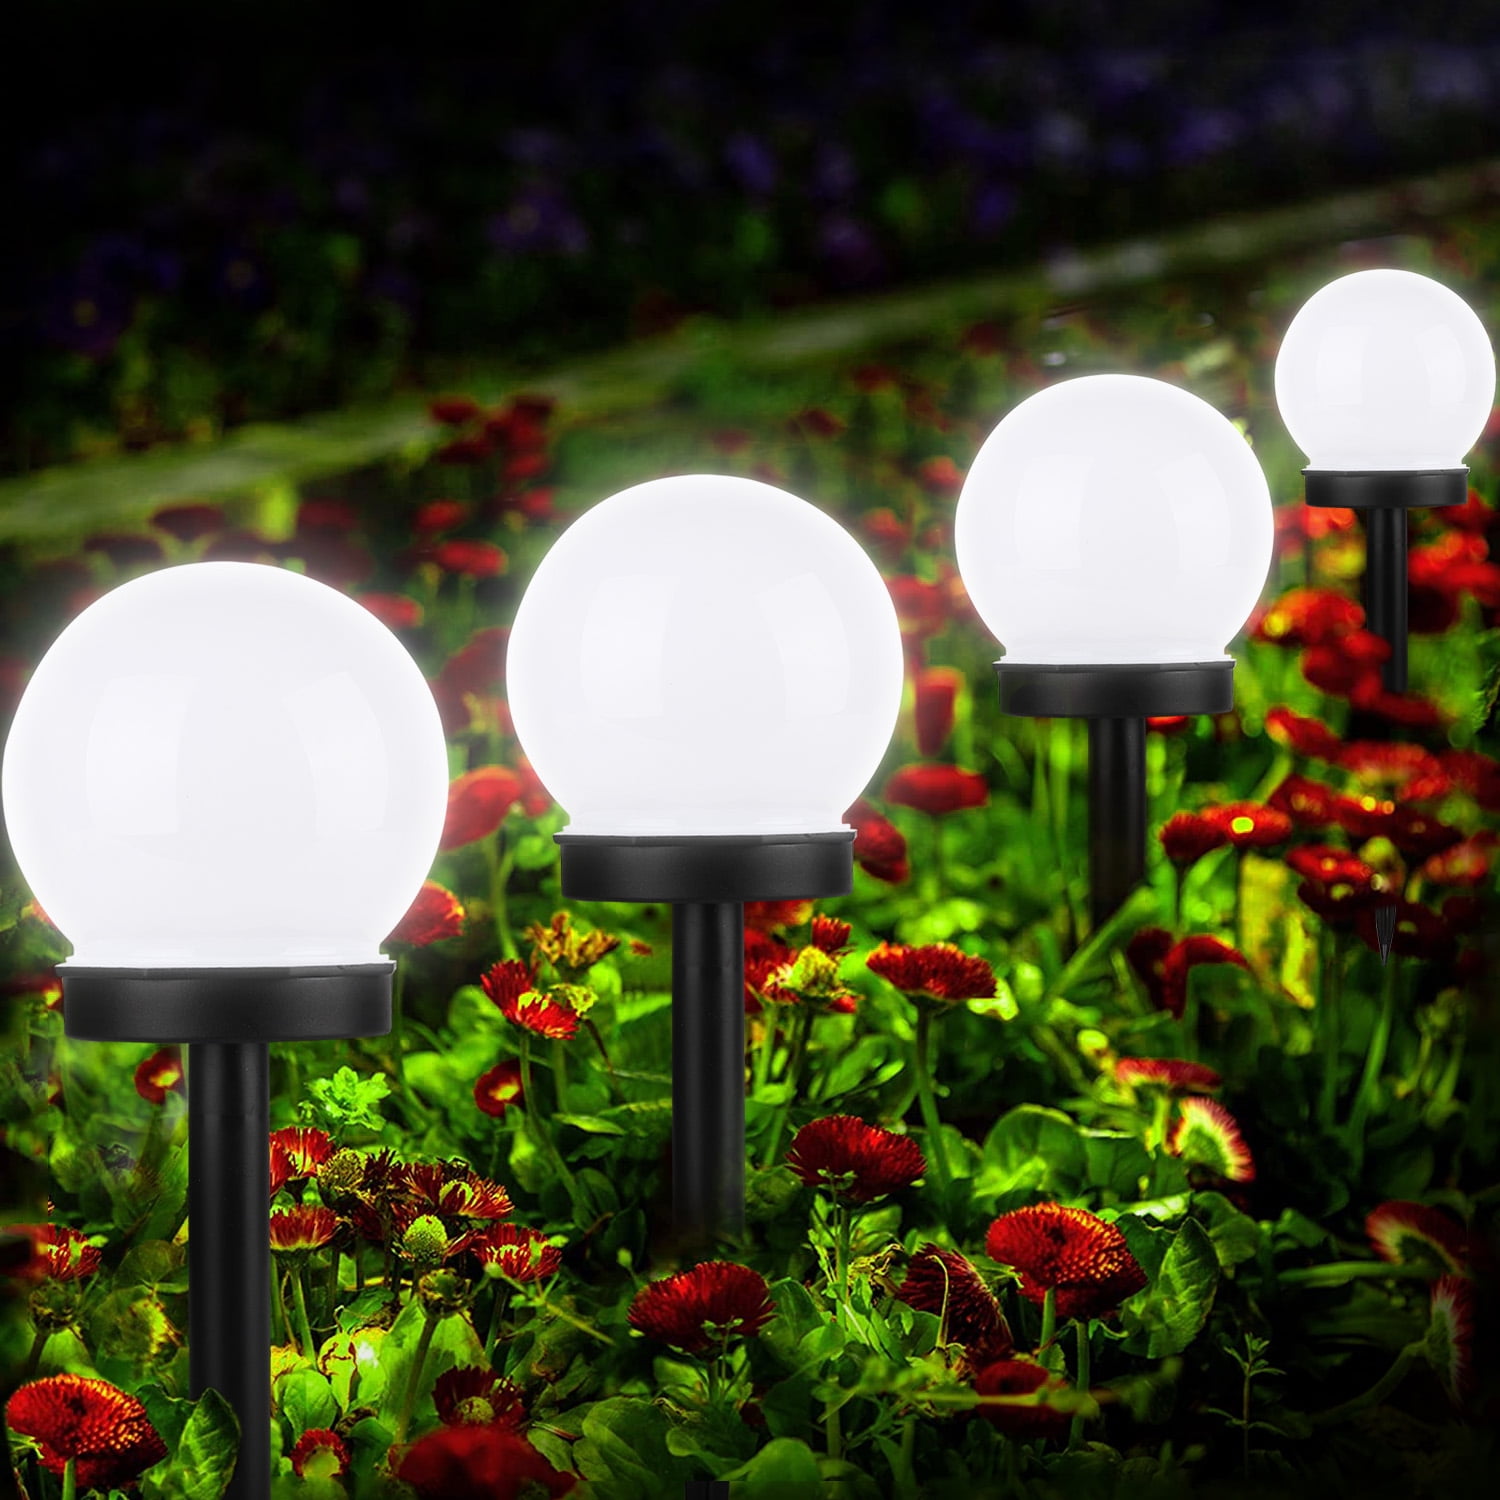 Solar Lights Outdoor Solar Garden Pathway Lights LED Landscape Lighting Waterproof for Path Lawn Patio Yard Walkway Driveway,4 LED Bulbs& 2 Lights Effect,White&Color Changing Lights 6pack-mushroom 